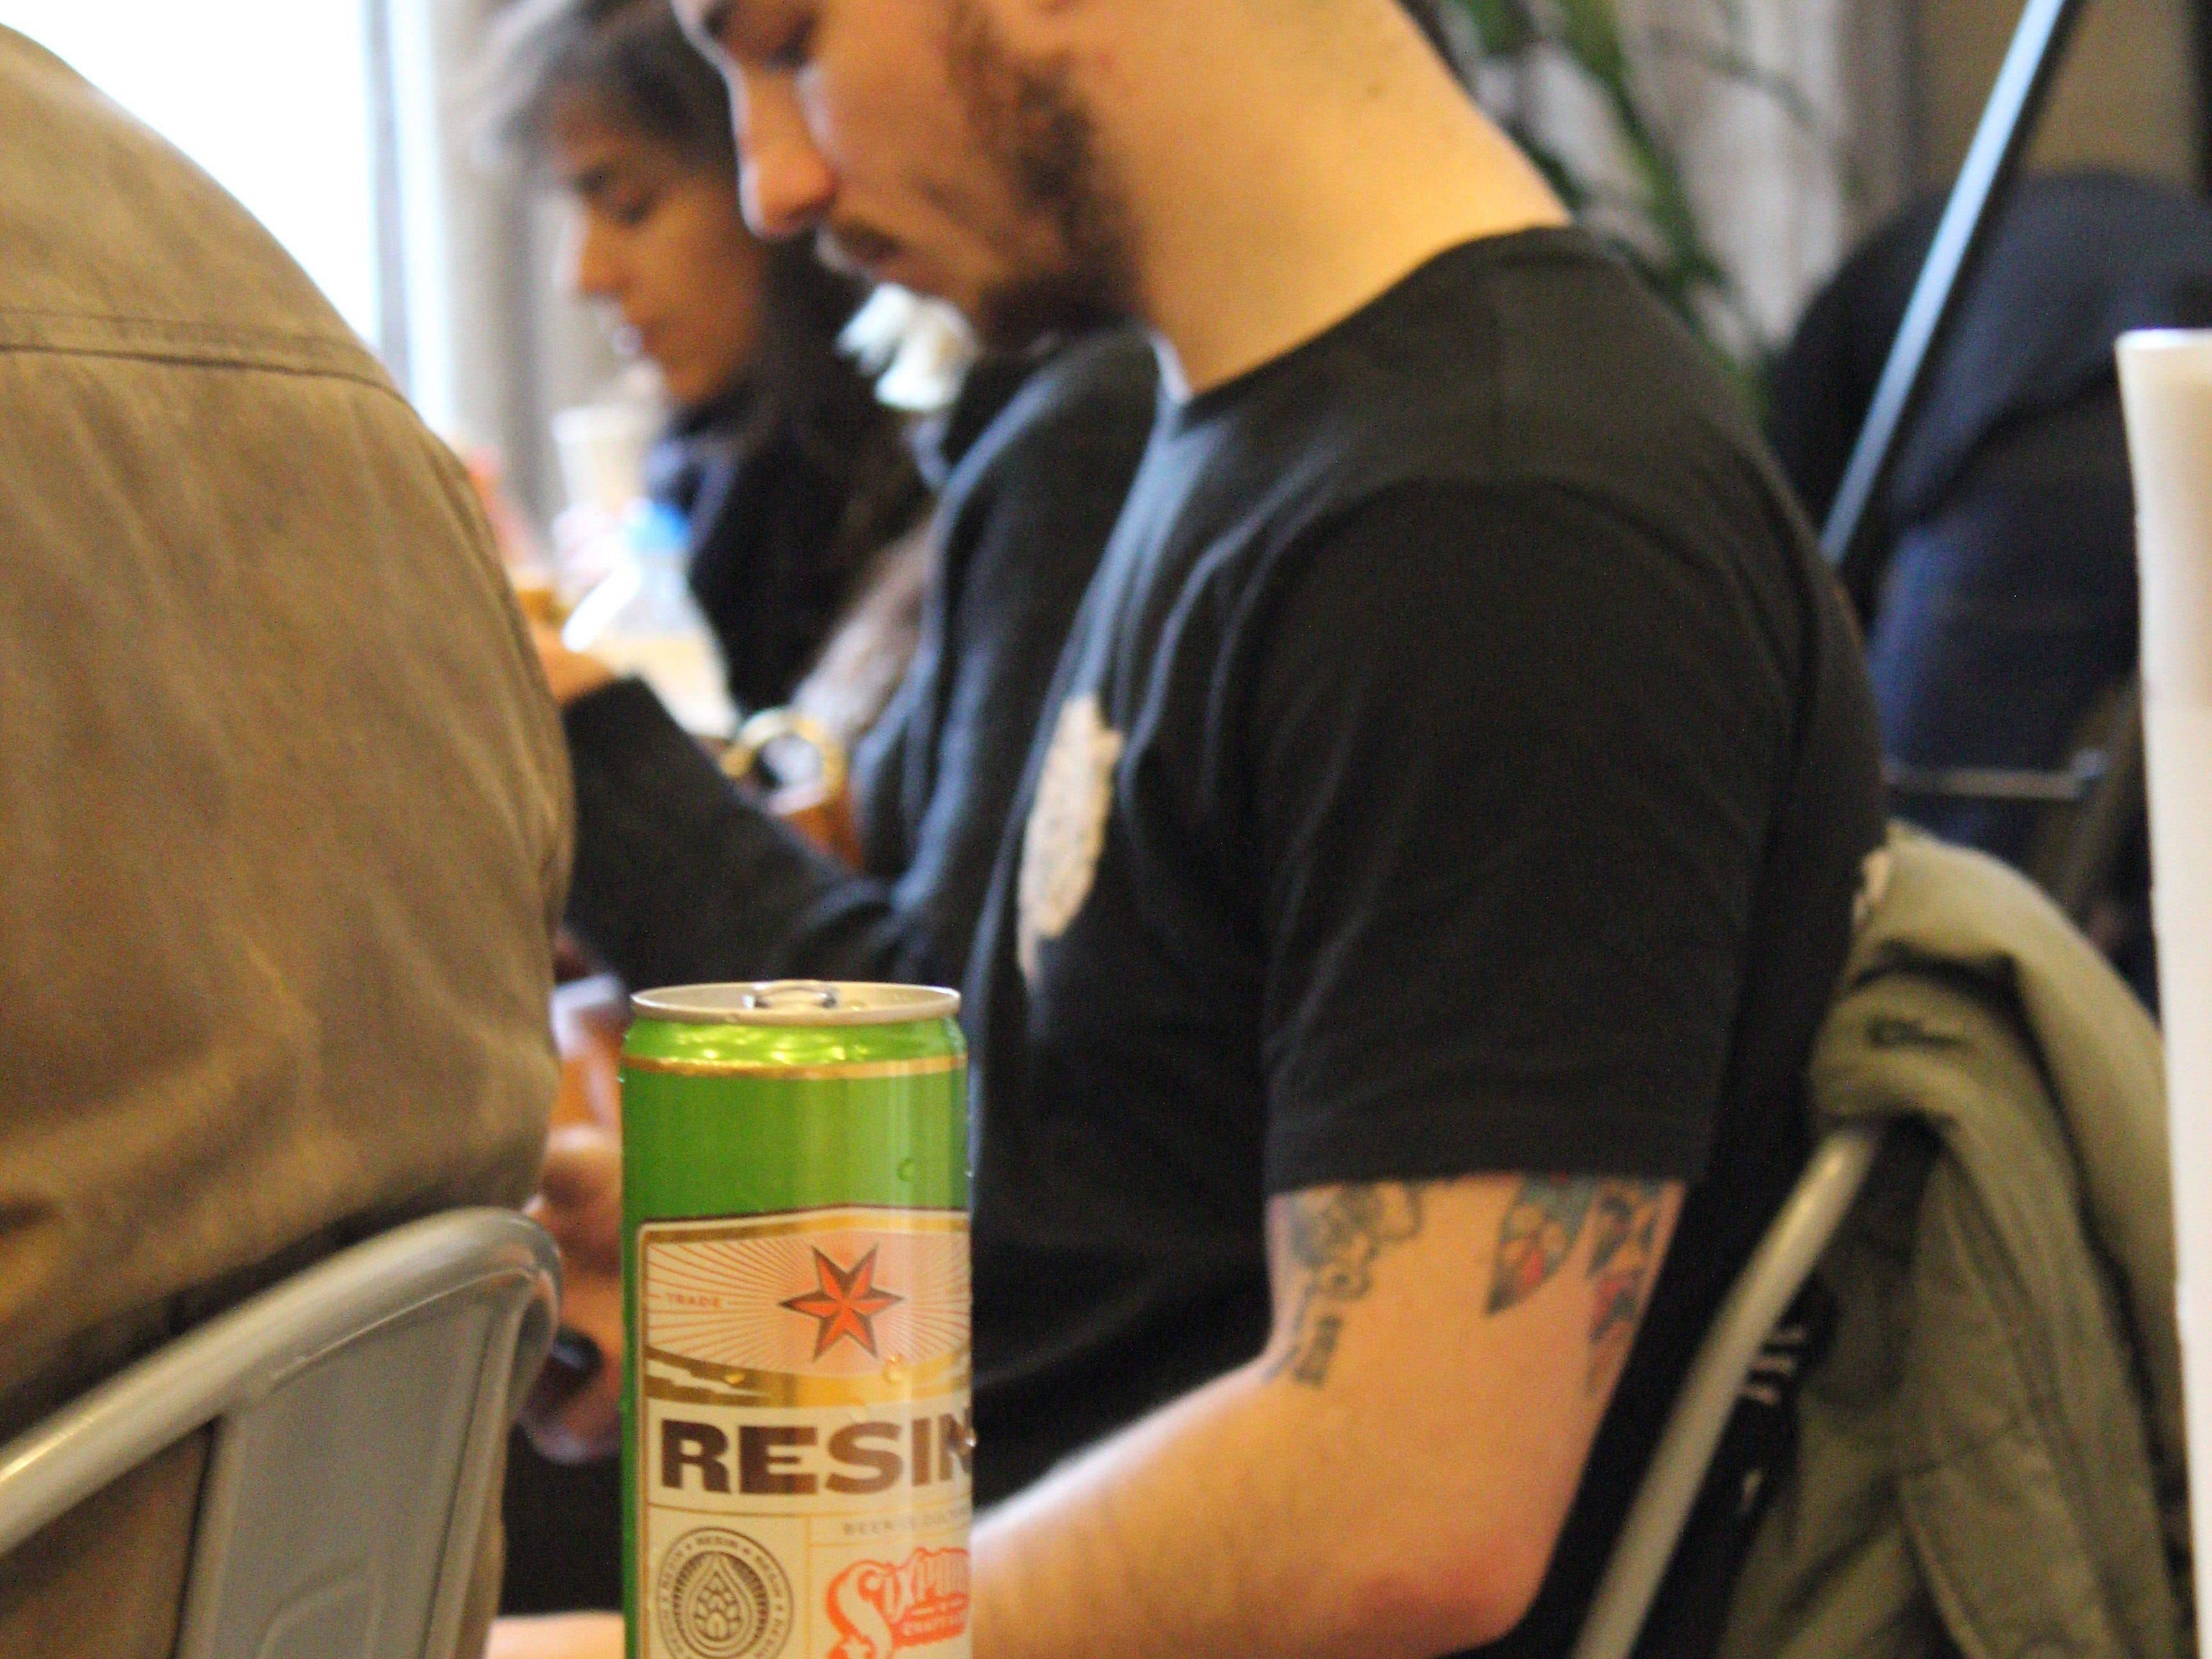 A person wearing a gray beanie and black t-shirt sits in a room with another individual. In the foreground, there is a green can of beer labeled "Resin" on a wooden table. A jacket is draped over the back of the person's chair. A plant is visible in the background.